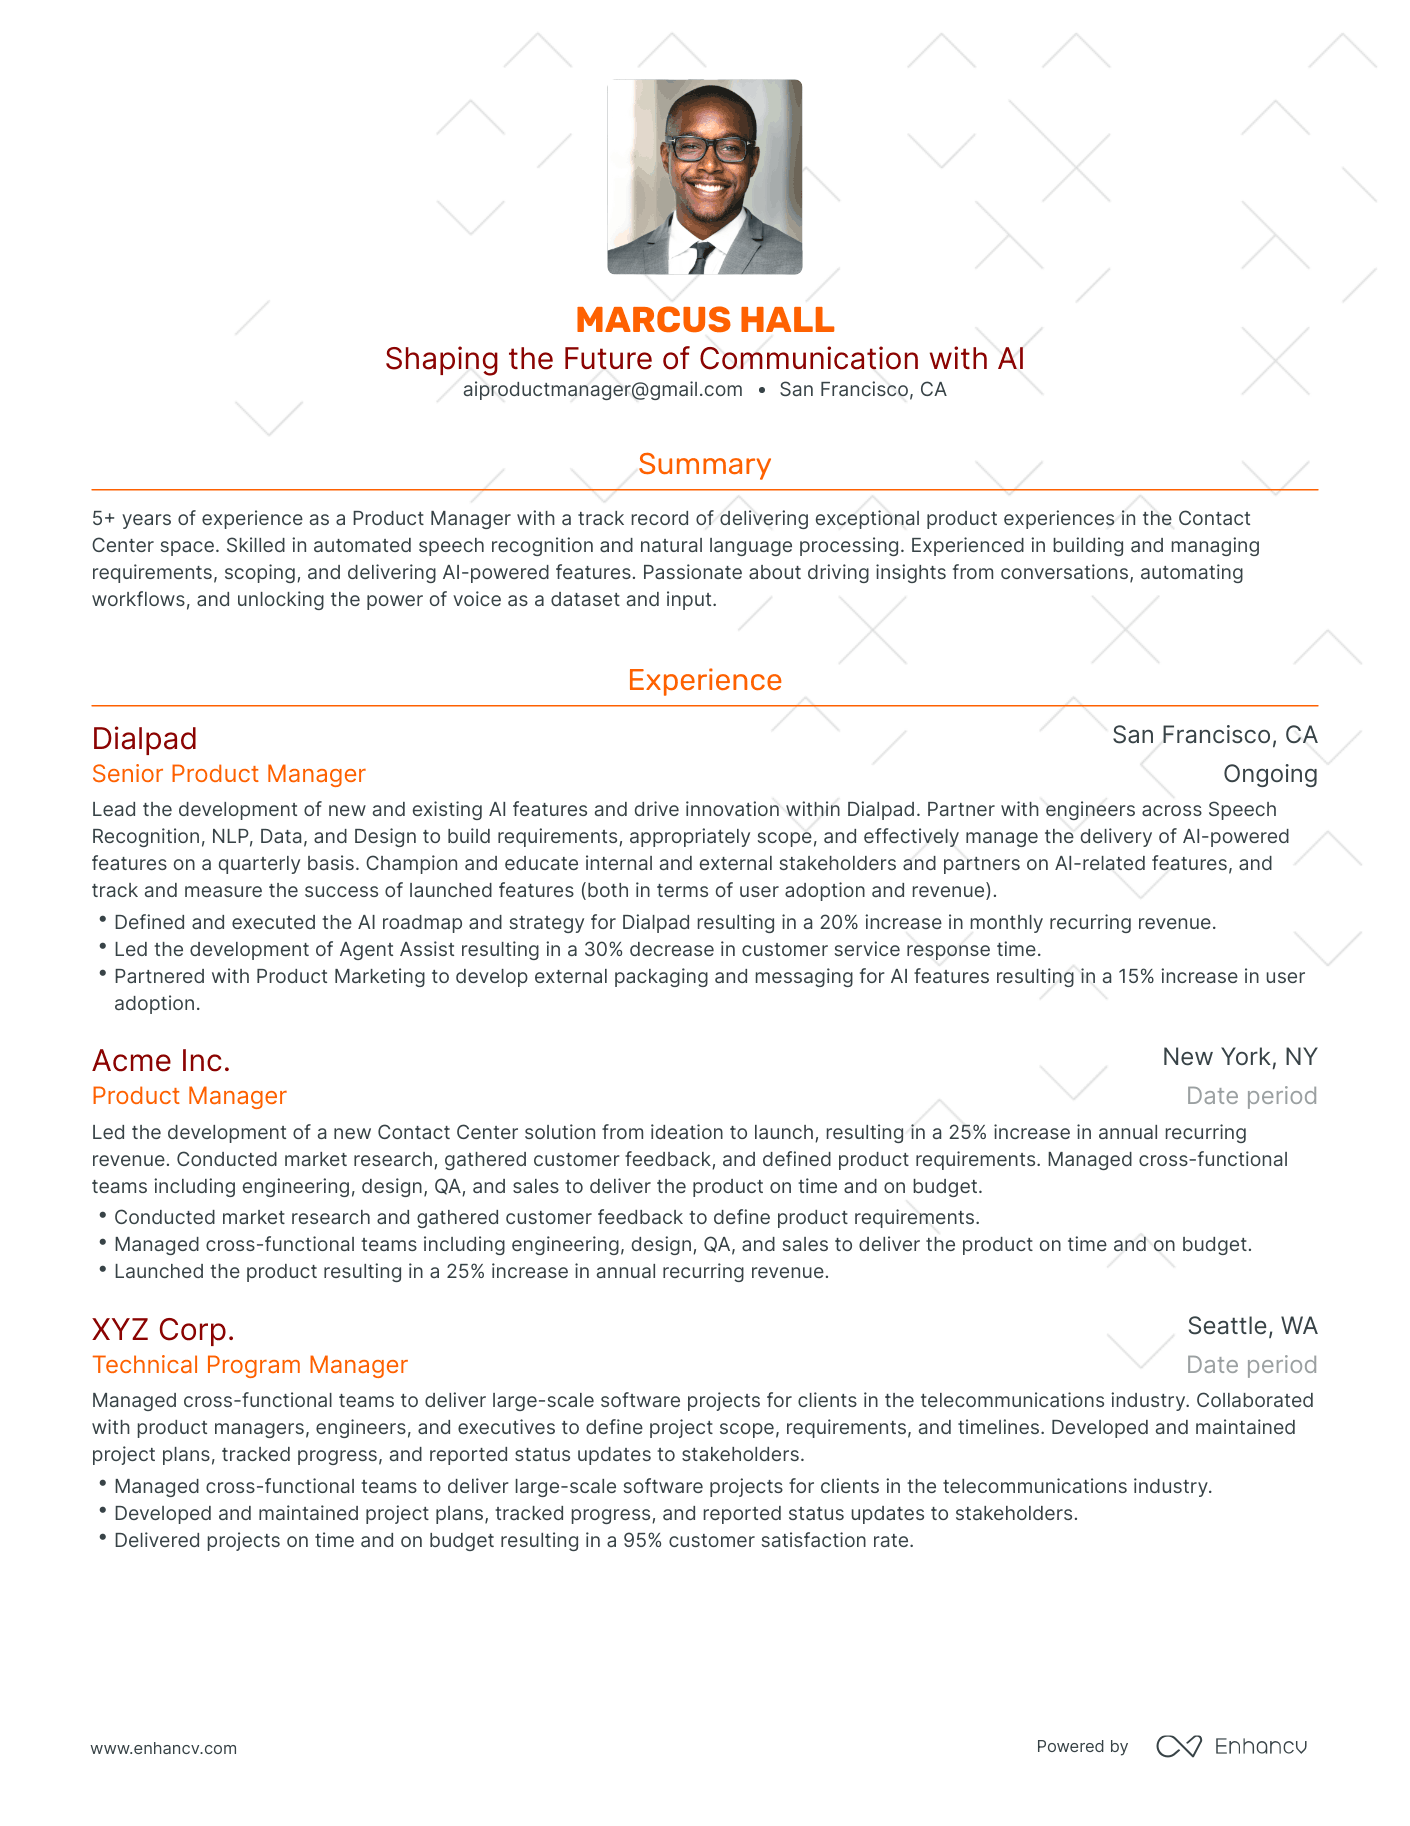 Traditional AI Product Manager Resume Template